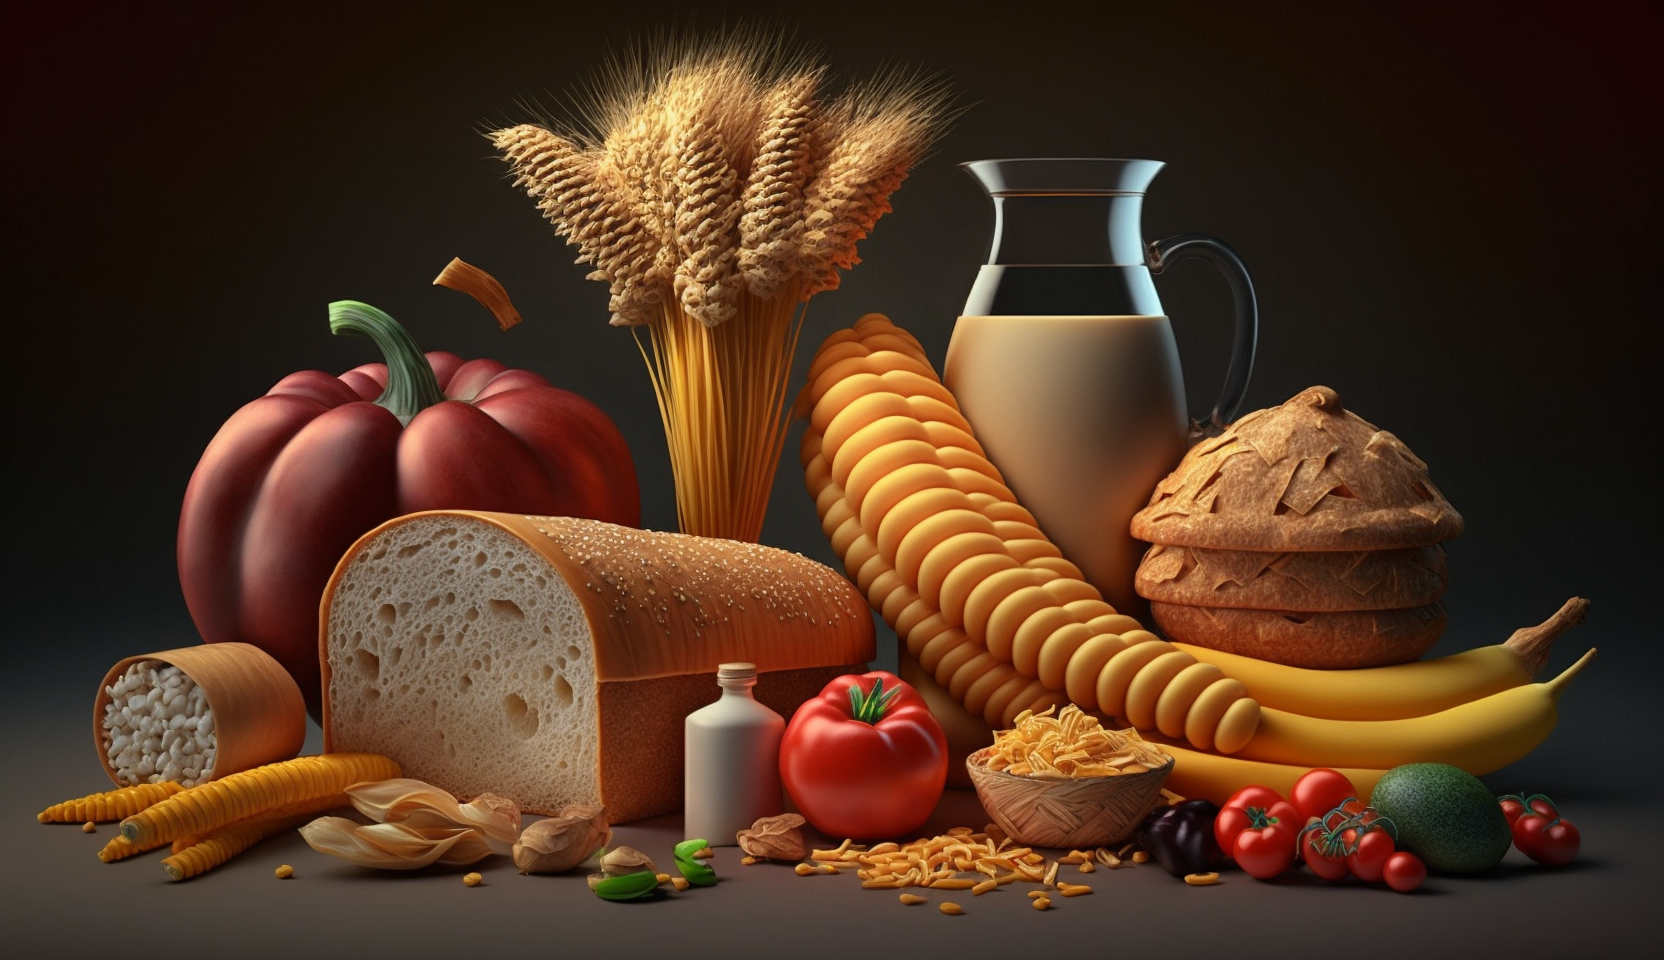 Carbohydrates in a healthy diet